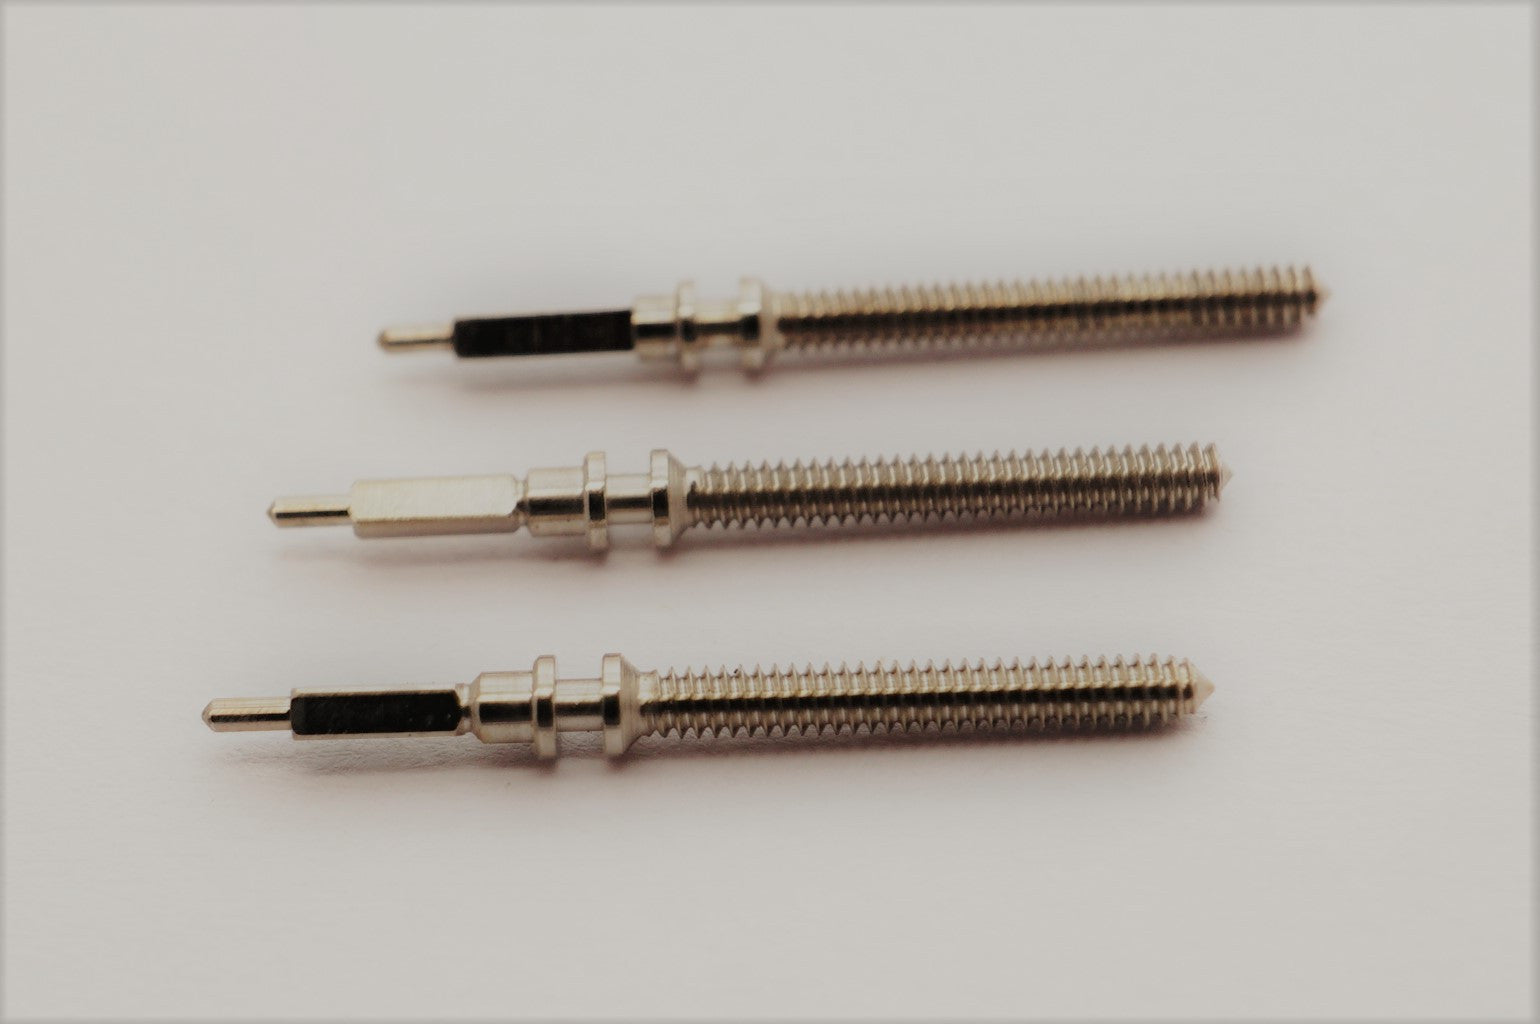 Winding Stems For Watches - Welwyn Watch Parts